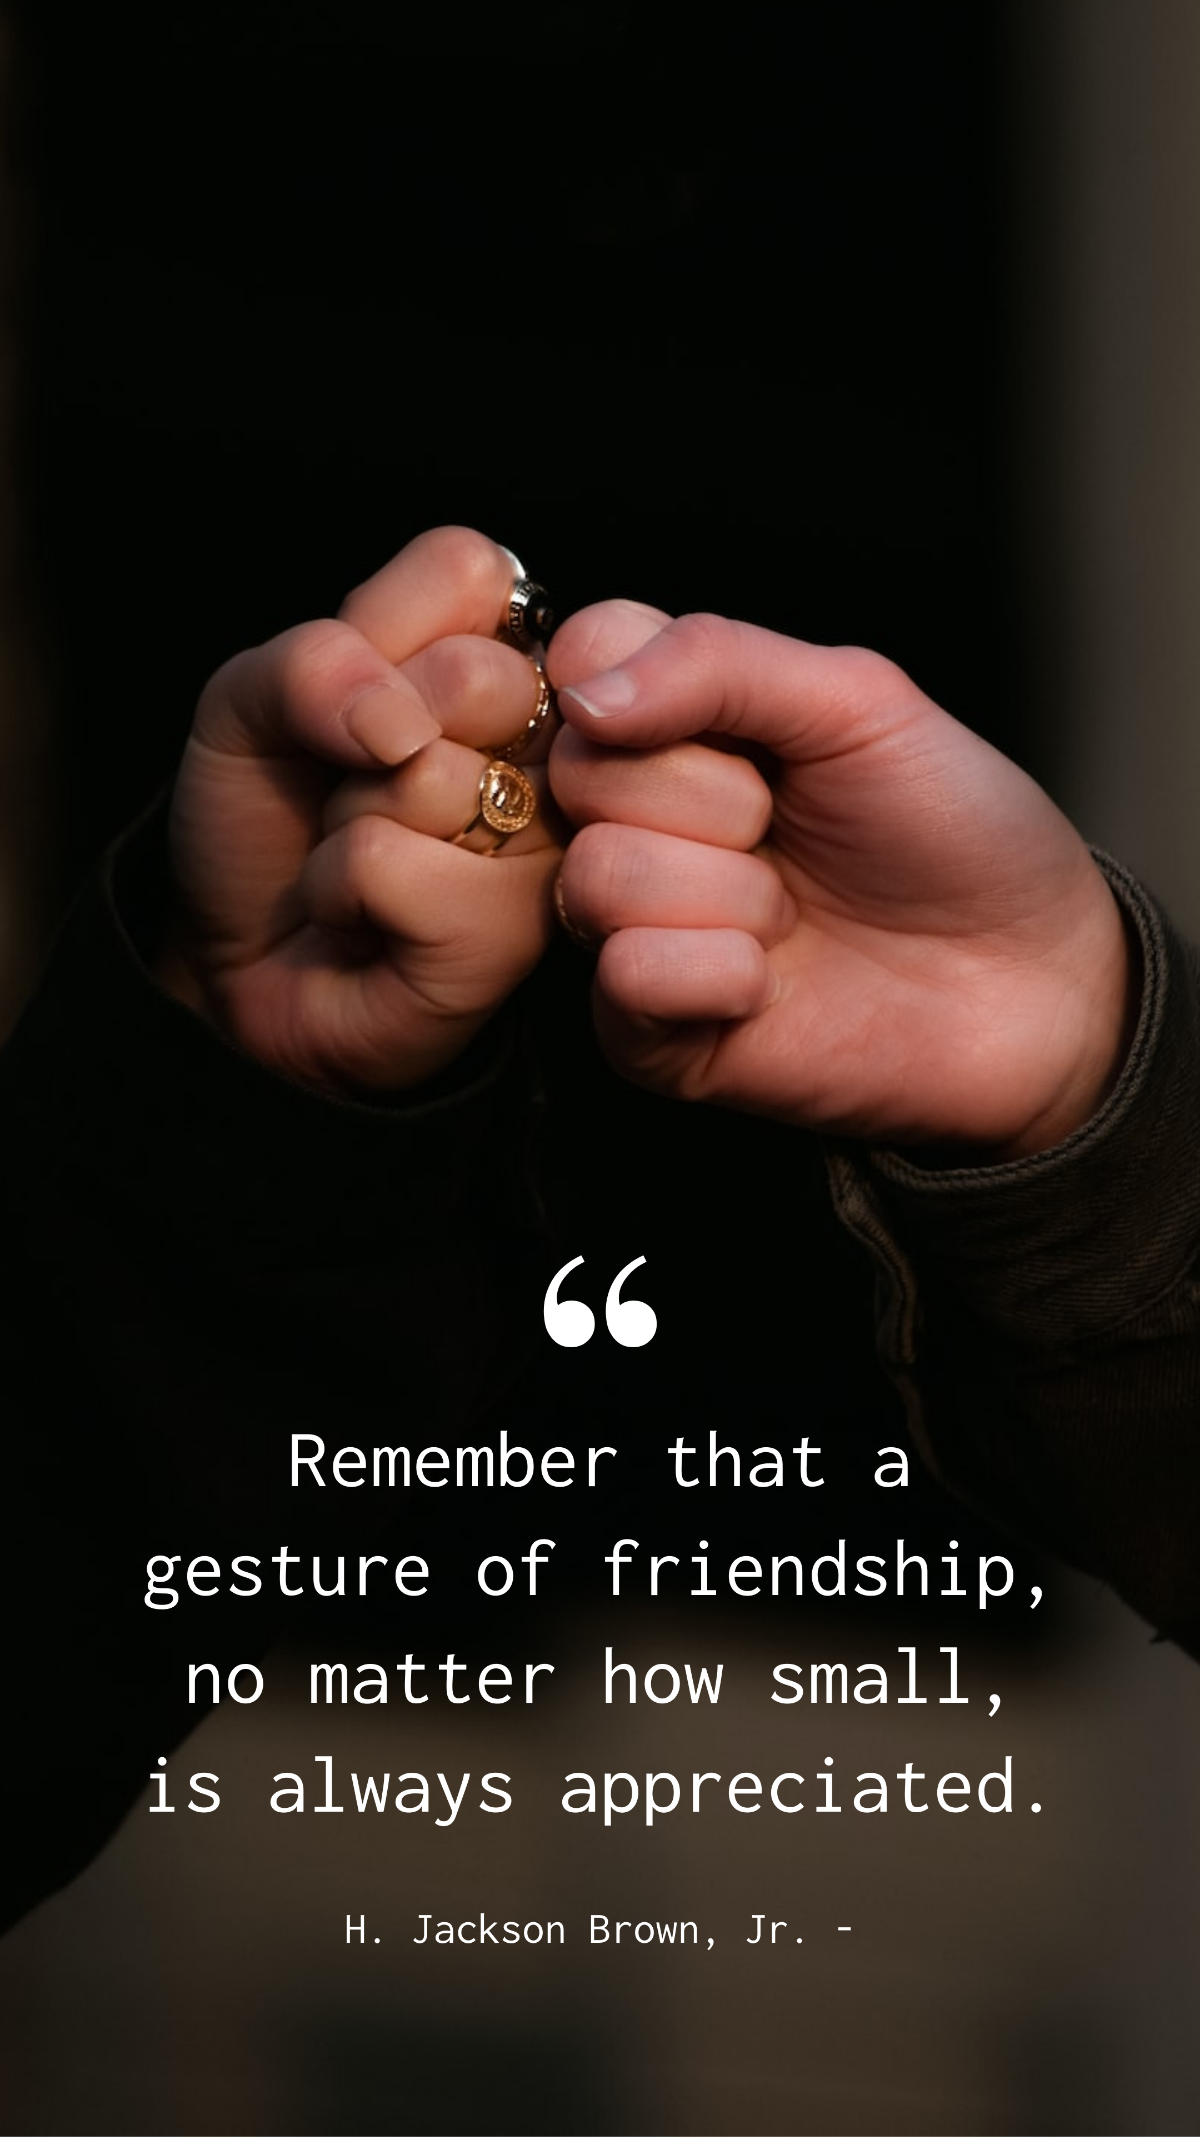 H. Jackson Brown, Jr. - Remember that a gesture of friendship, no matter how small, is always appreciated. Template